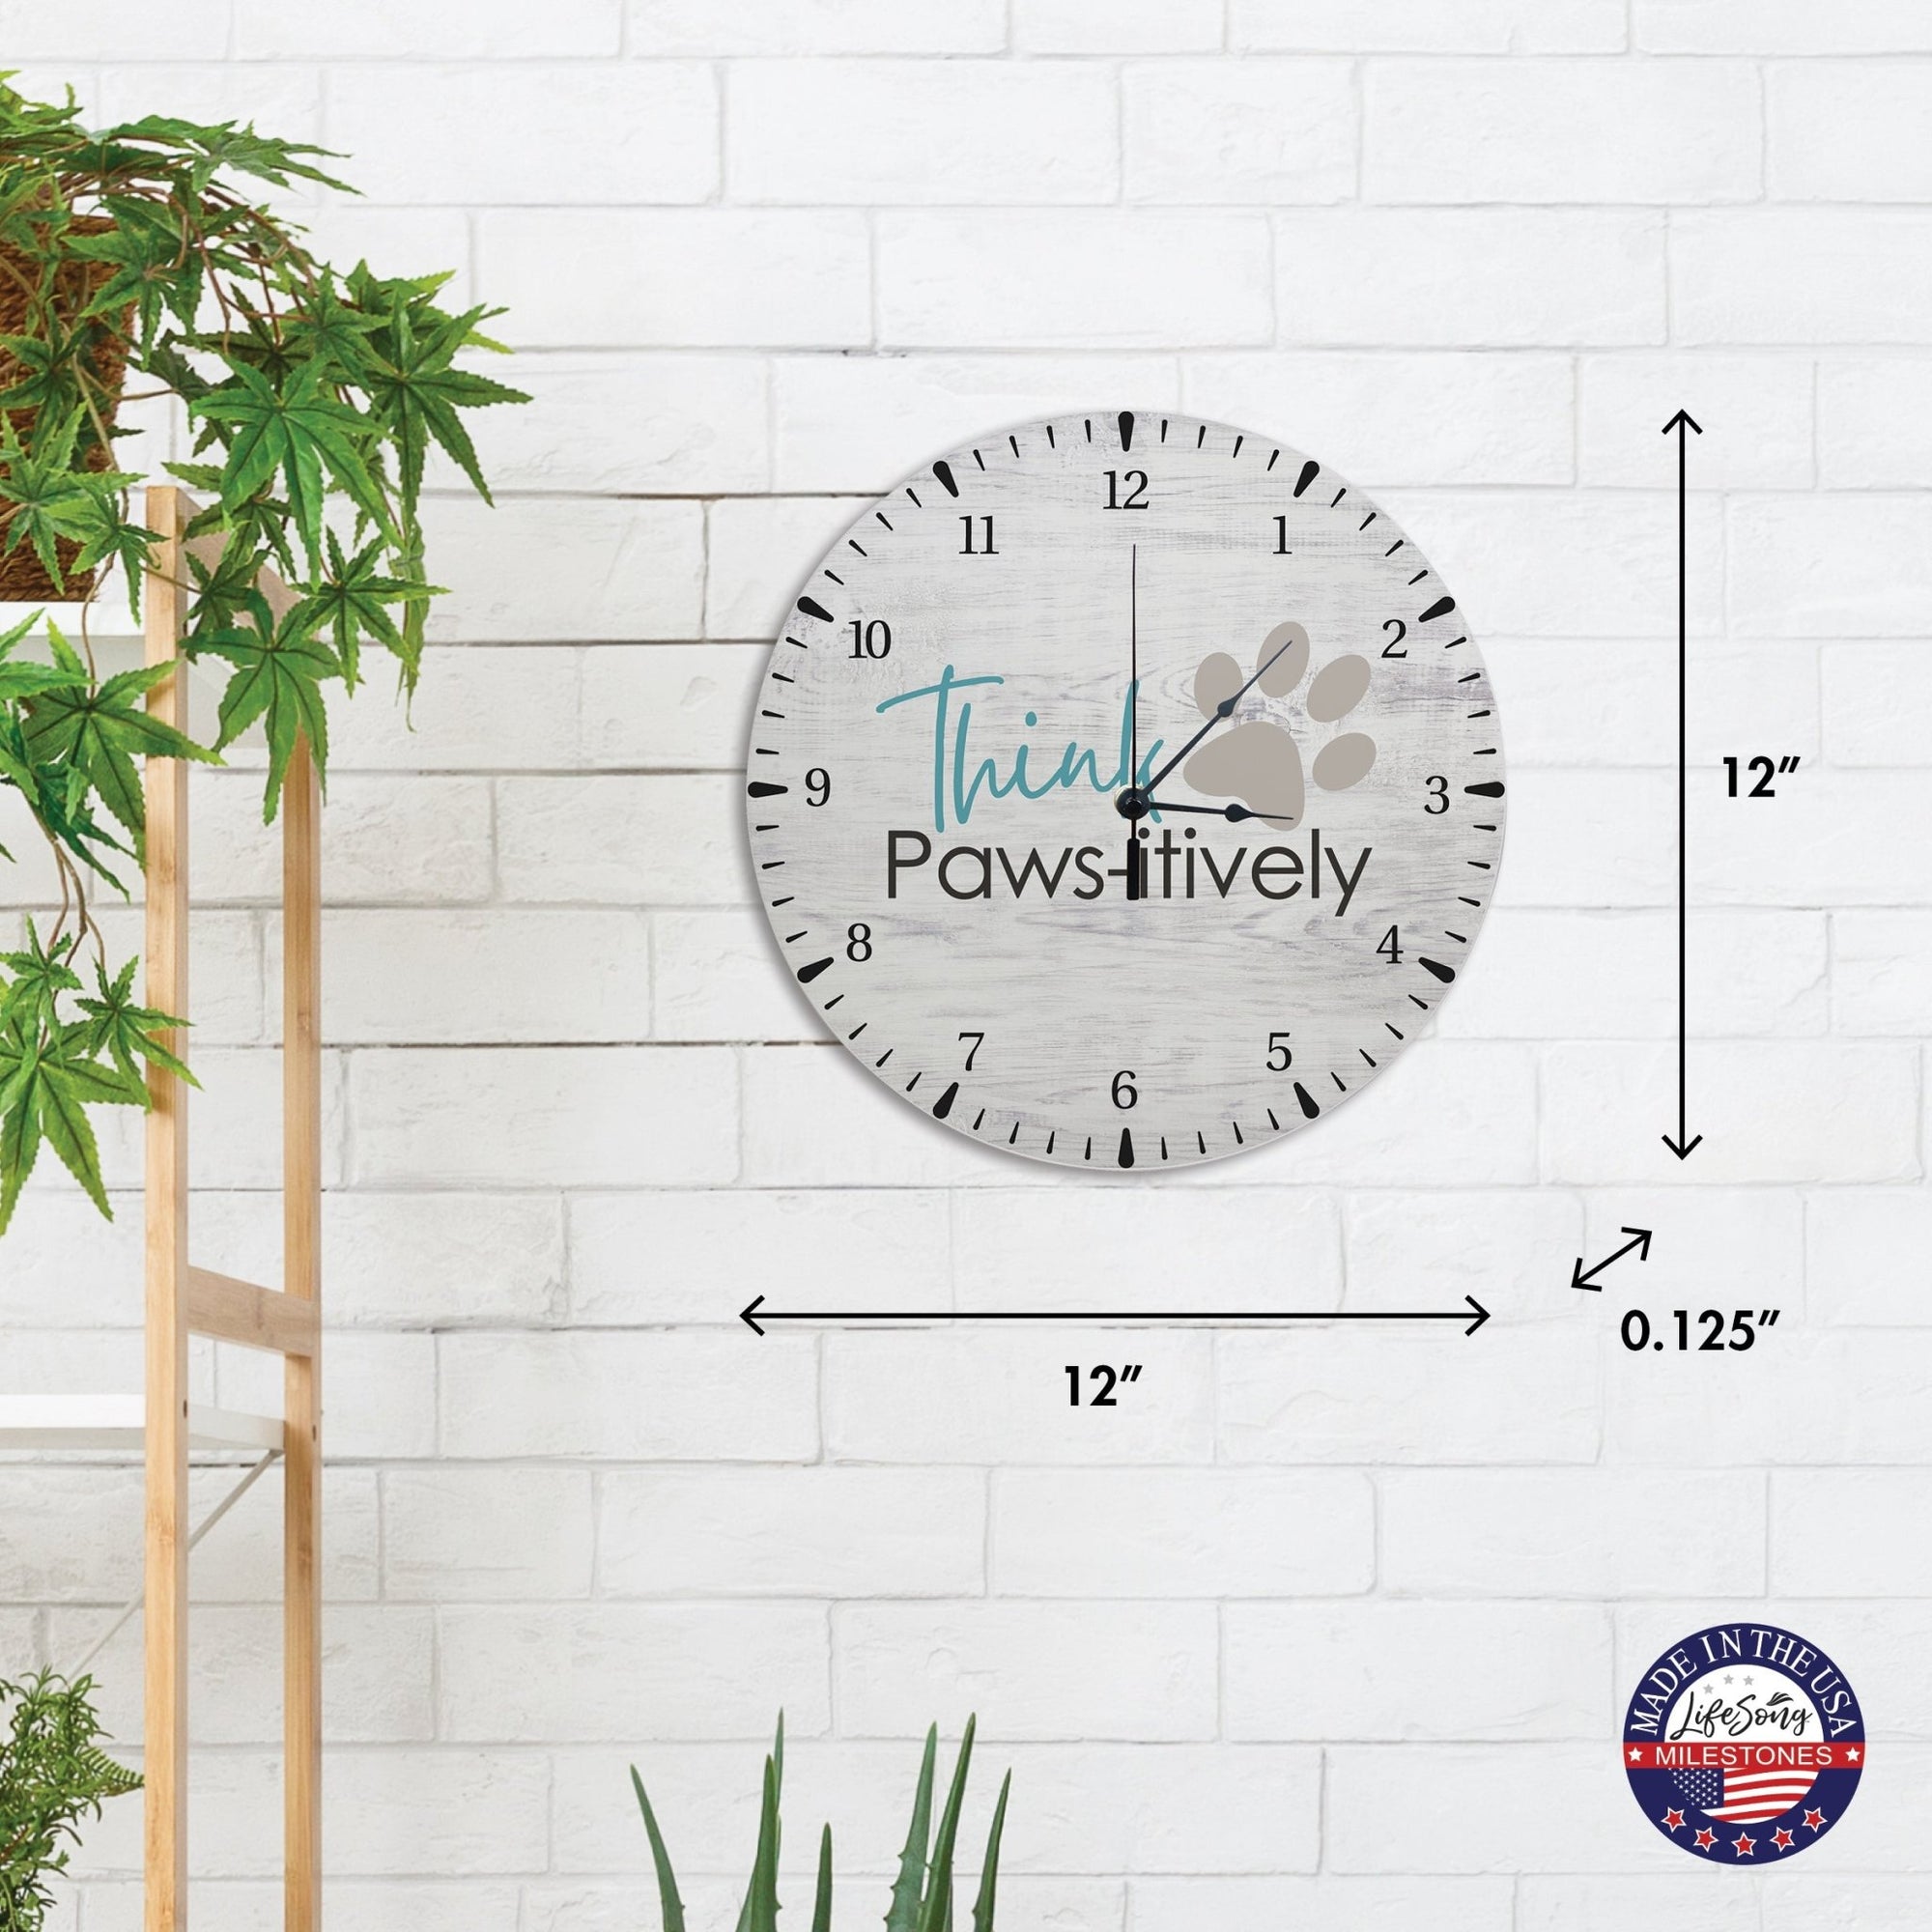 Minimalist Roman Numeral Wooden Clock For Walls Or Countertop Display For Pet Owners - This Pawsitively - LifeSong Milestones